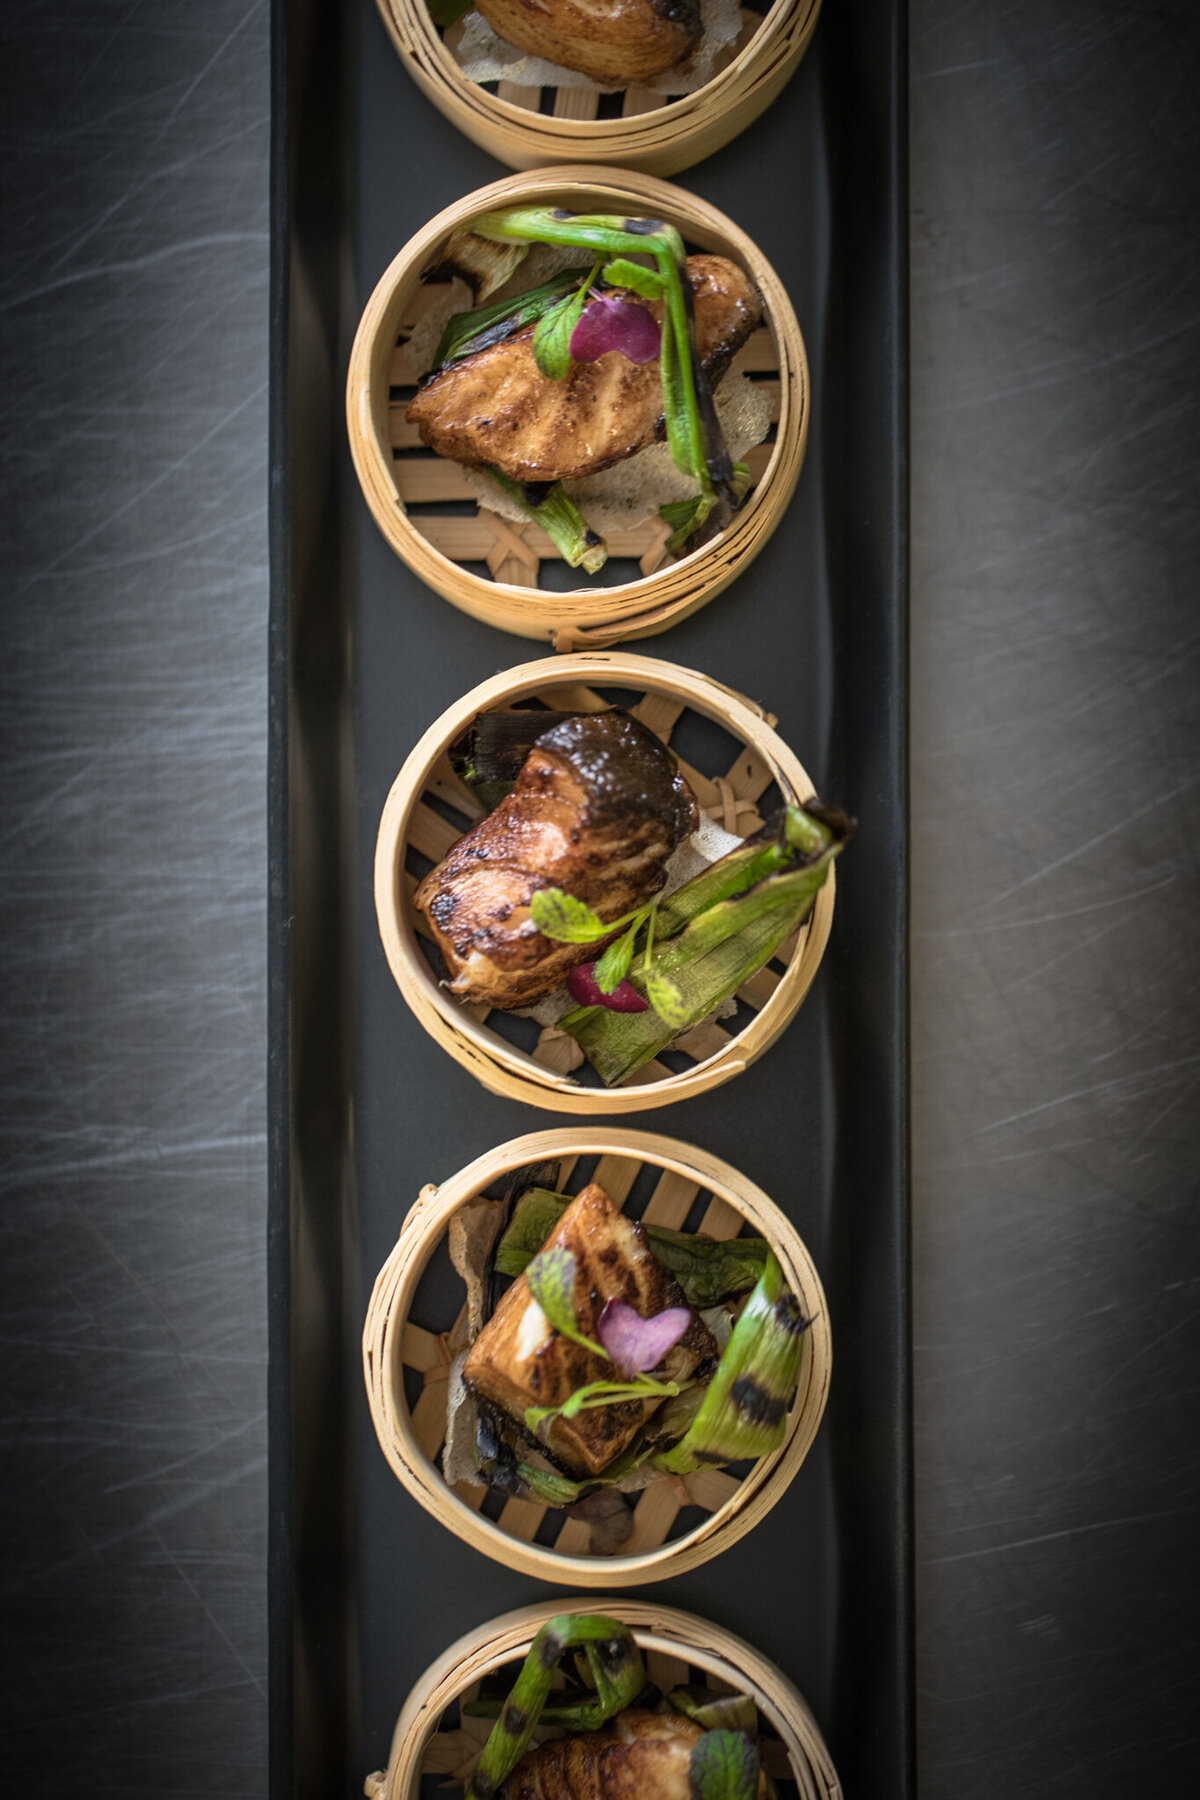 Artisan meal served in bamboo steamer baskets, created by Food Works Craft Catering, contemporary catering in Calgary, Alberta, featured on the Brontë Bride Vendor Guide.